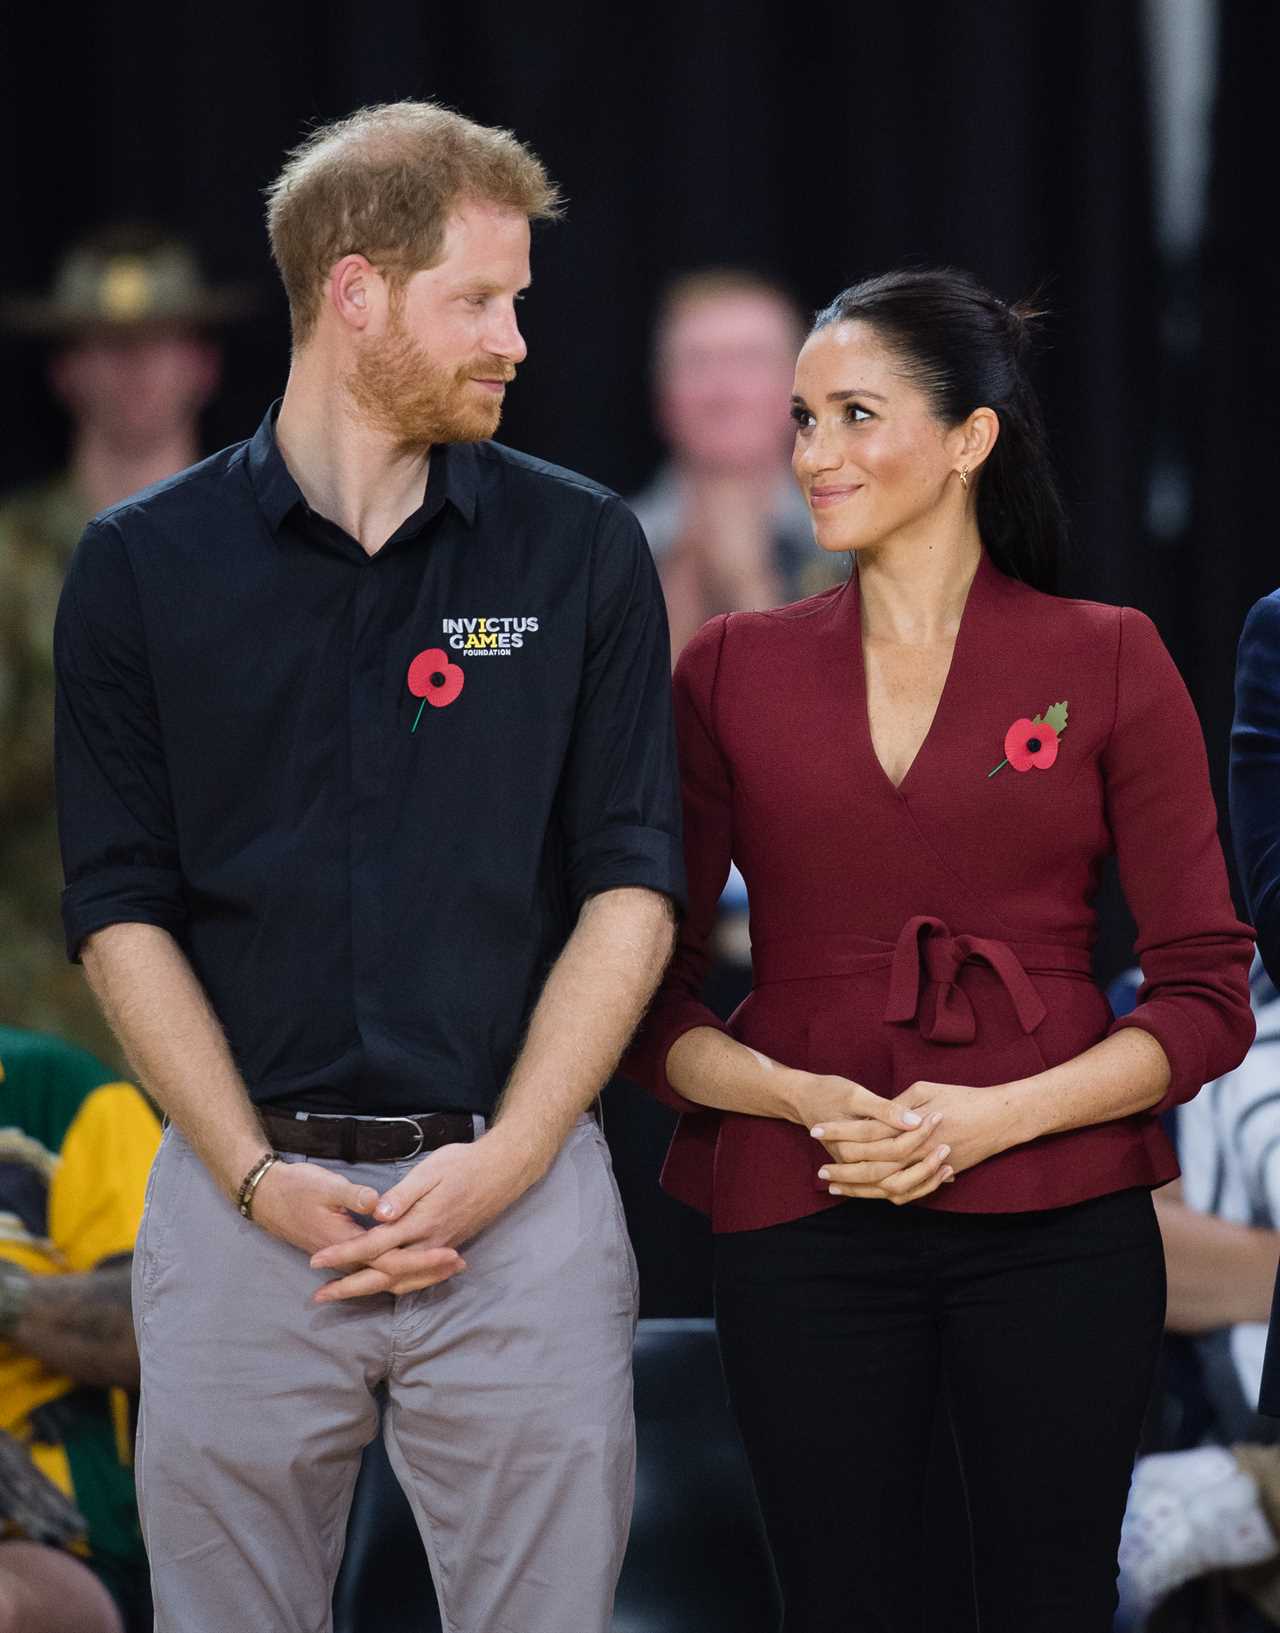 Meghan Markle ‘told Prince Harry she would break up with him if he didn’t announce they were dating’